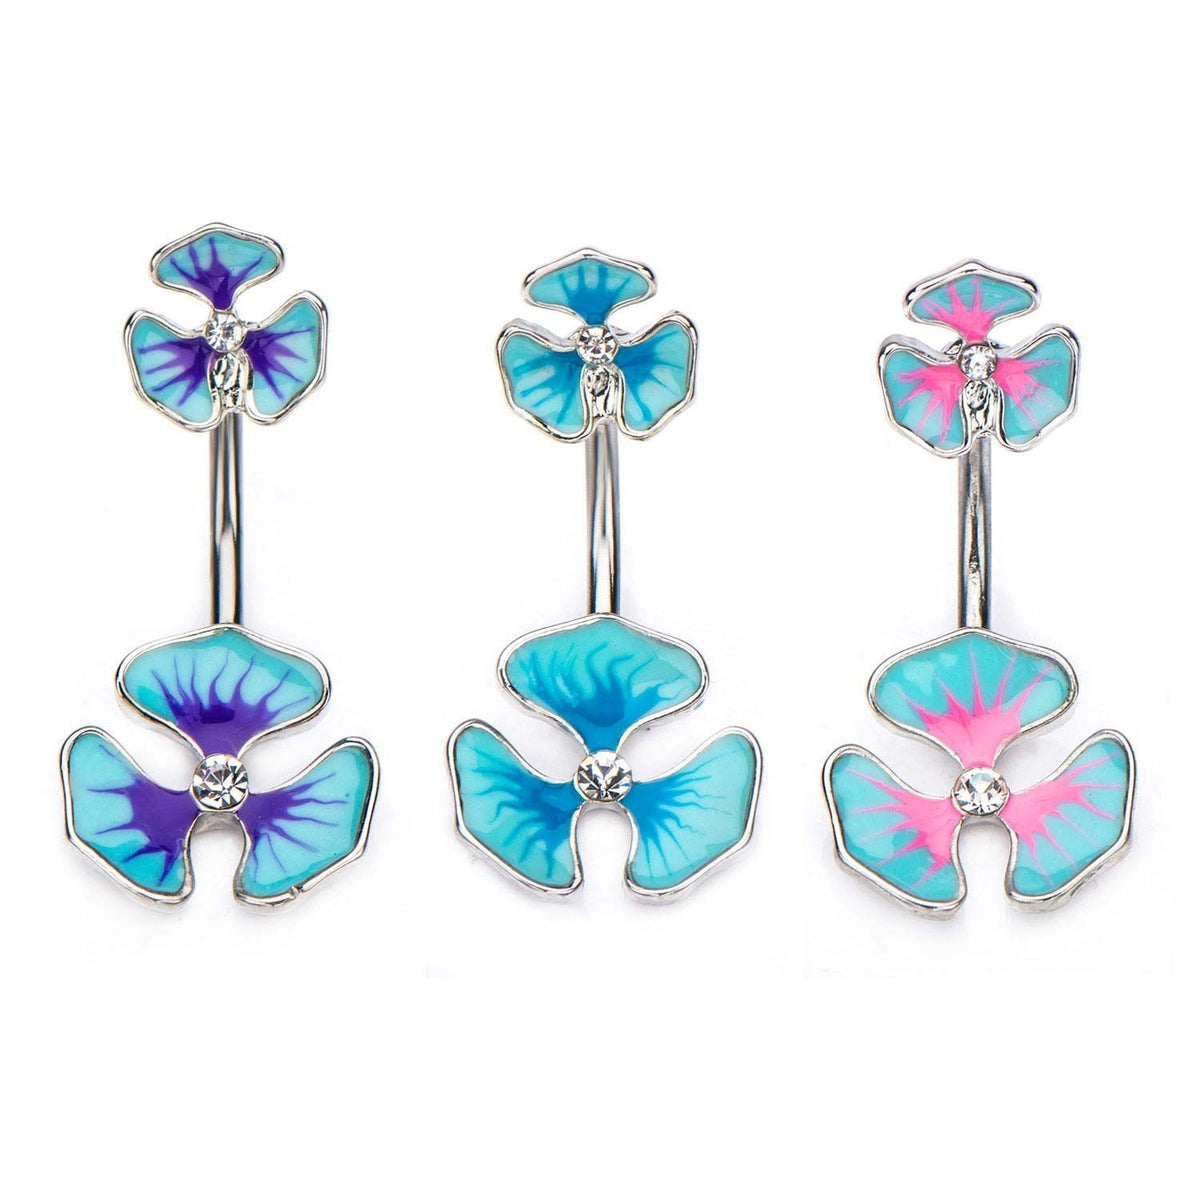 In and Out w/ Clear CZ Gem Enamel Flower Navel. sbvbn615